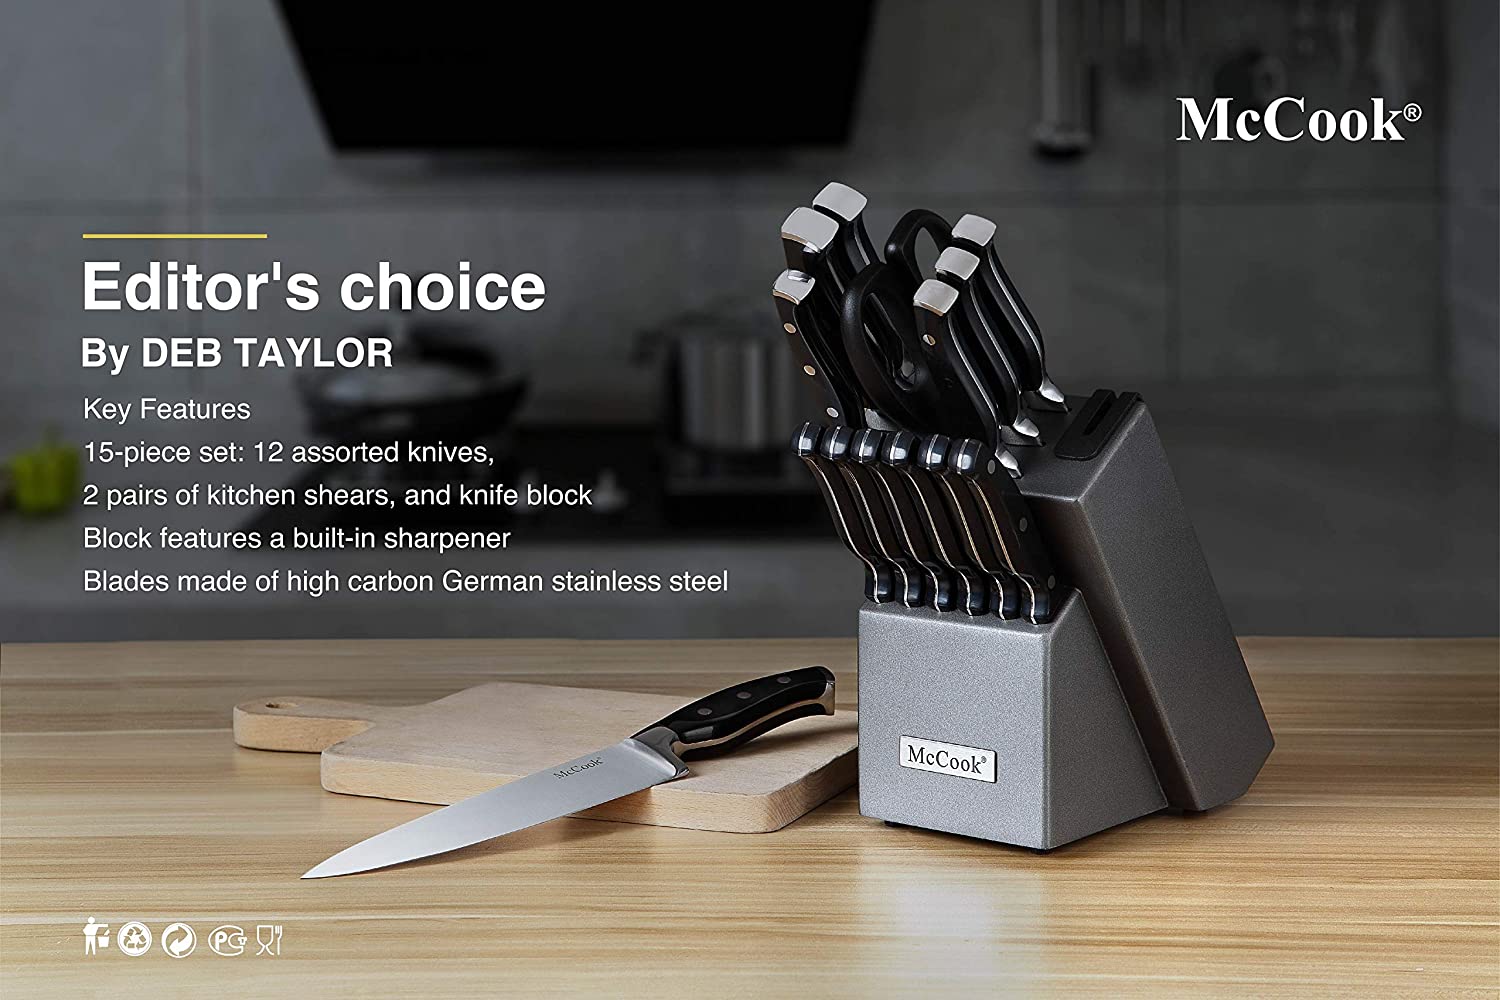 https://discounttoday.net/wp-content/uploads/2022/11/McCook%C2%AE-MC25A-Knife-Sets15-Pieces-German-Stainless-Steel-Kitchen-Knife-Block-Set-with-Built-in-Sharpener3.jpg